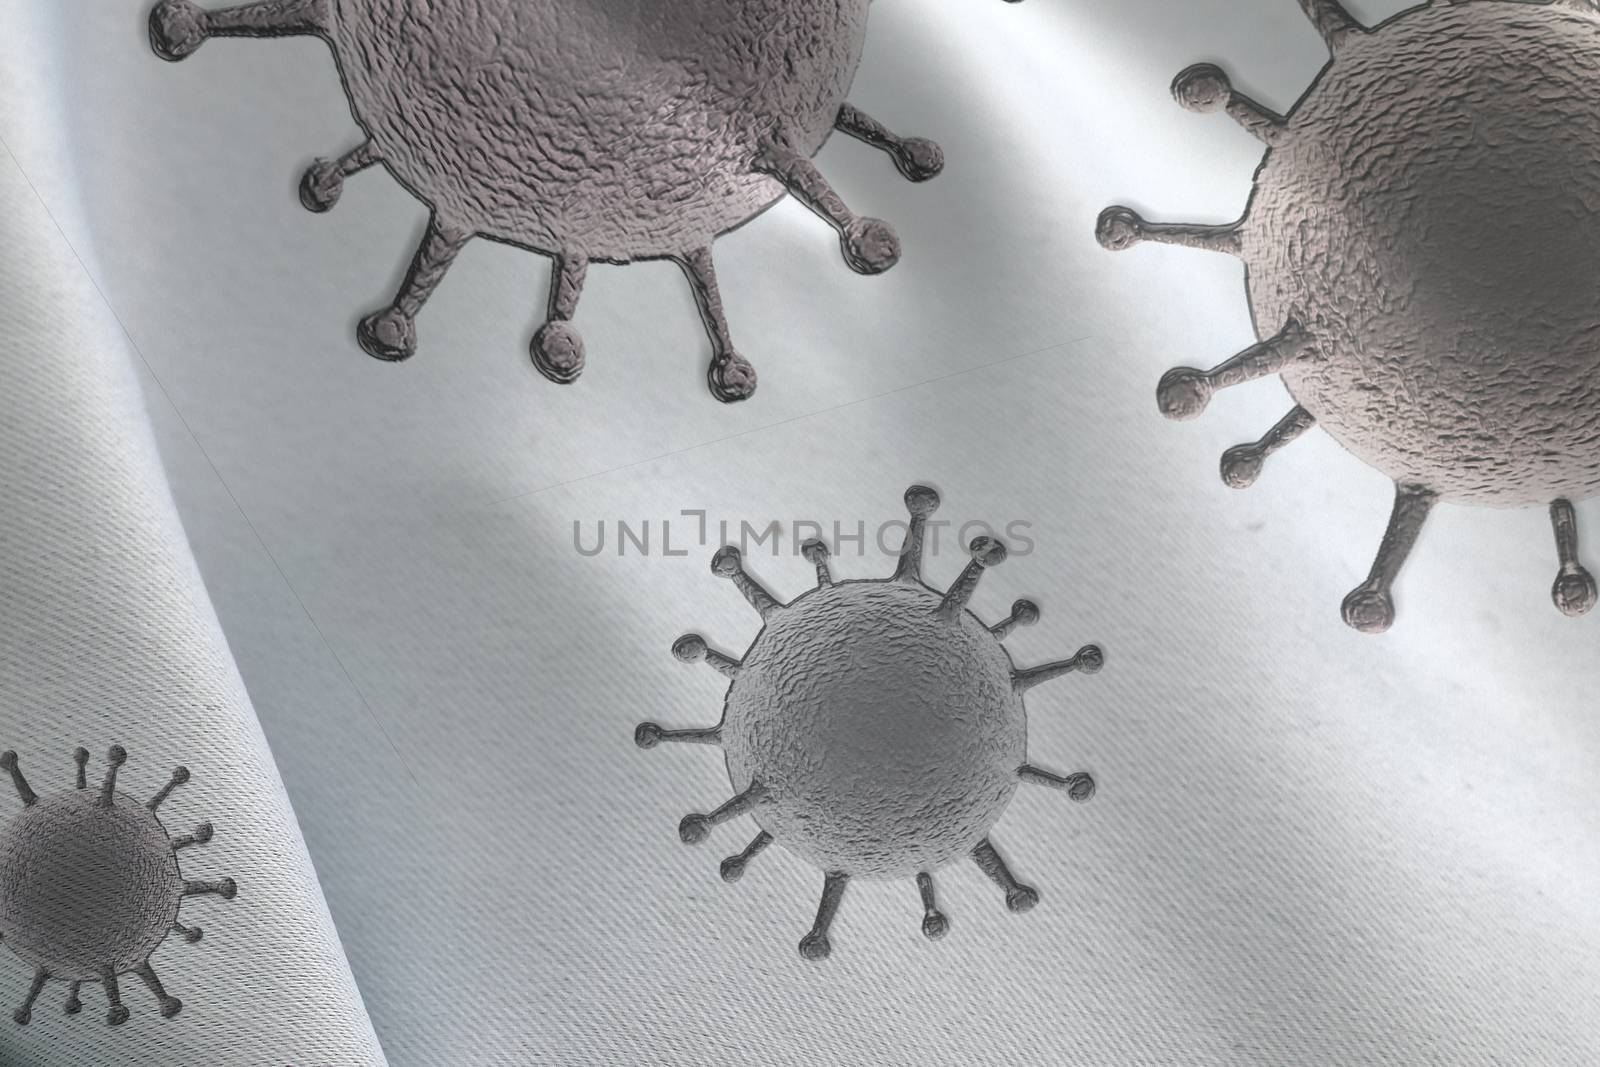 Folded textile and fabric textures with some virus fossil visualization